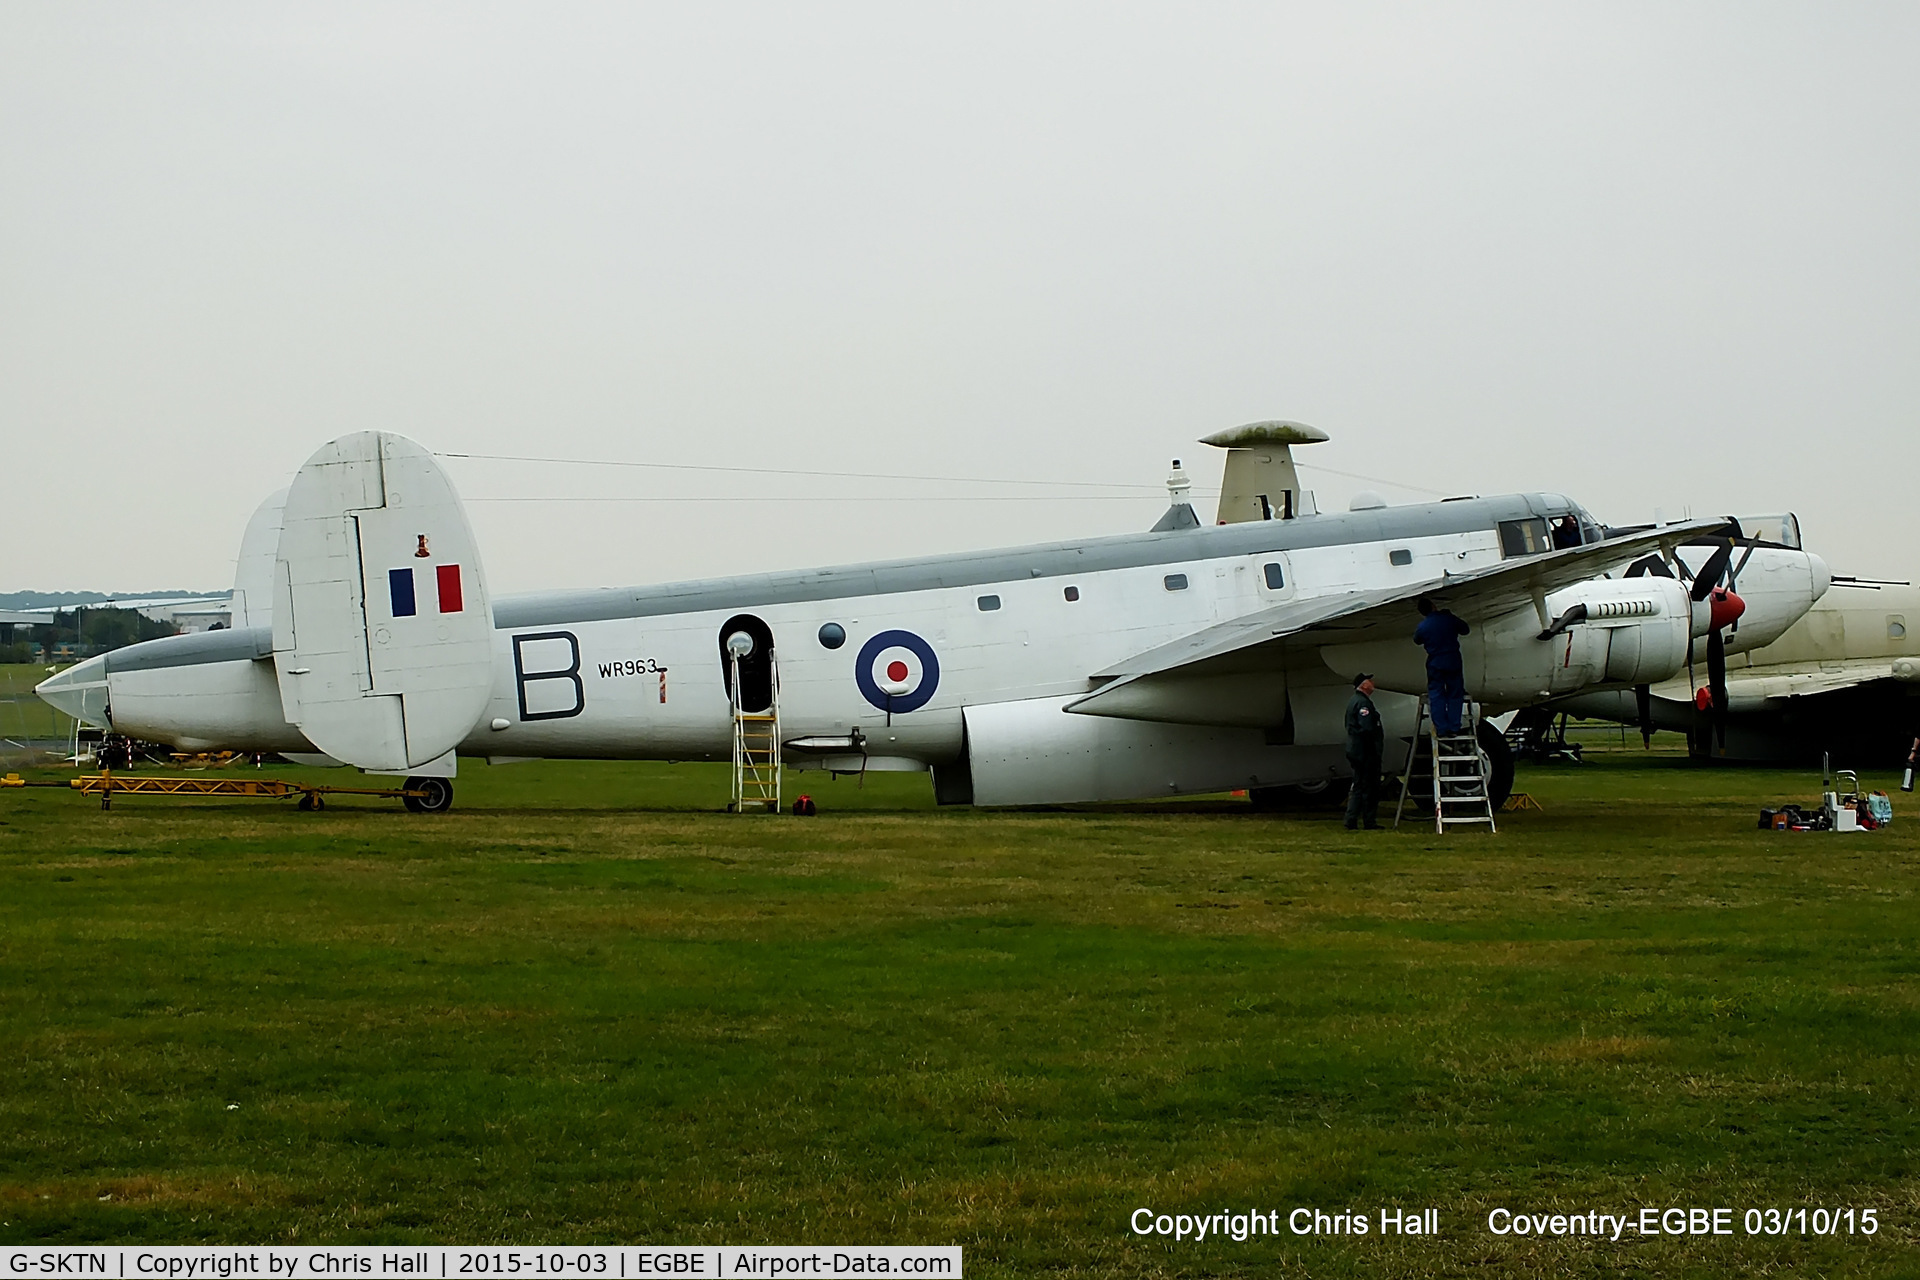 G-SKTN, 1954 Avro 696 Shackleton AEW.2 C/N Not found WR963, being restored to flying condition by The 'Friends of WR963'